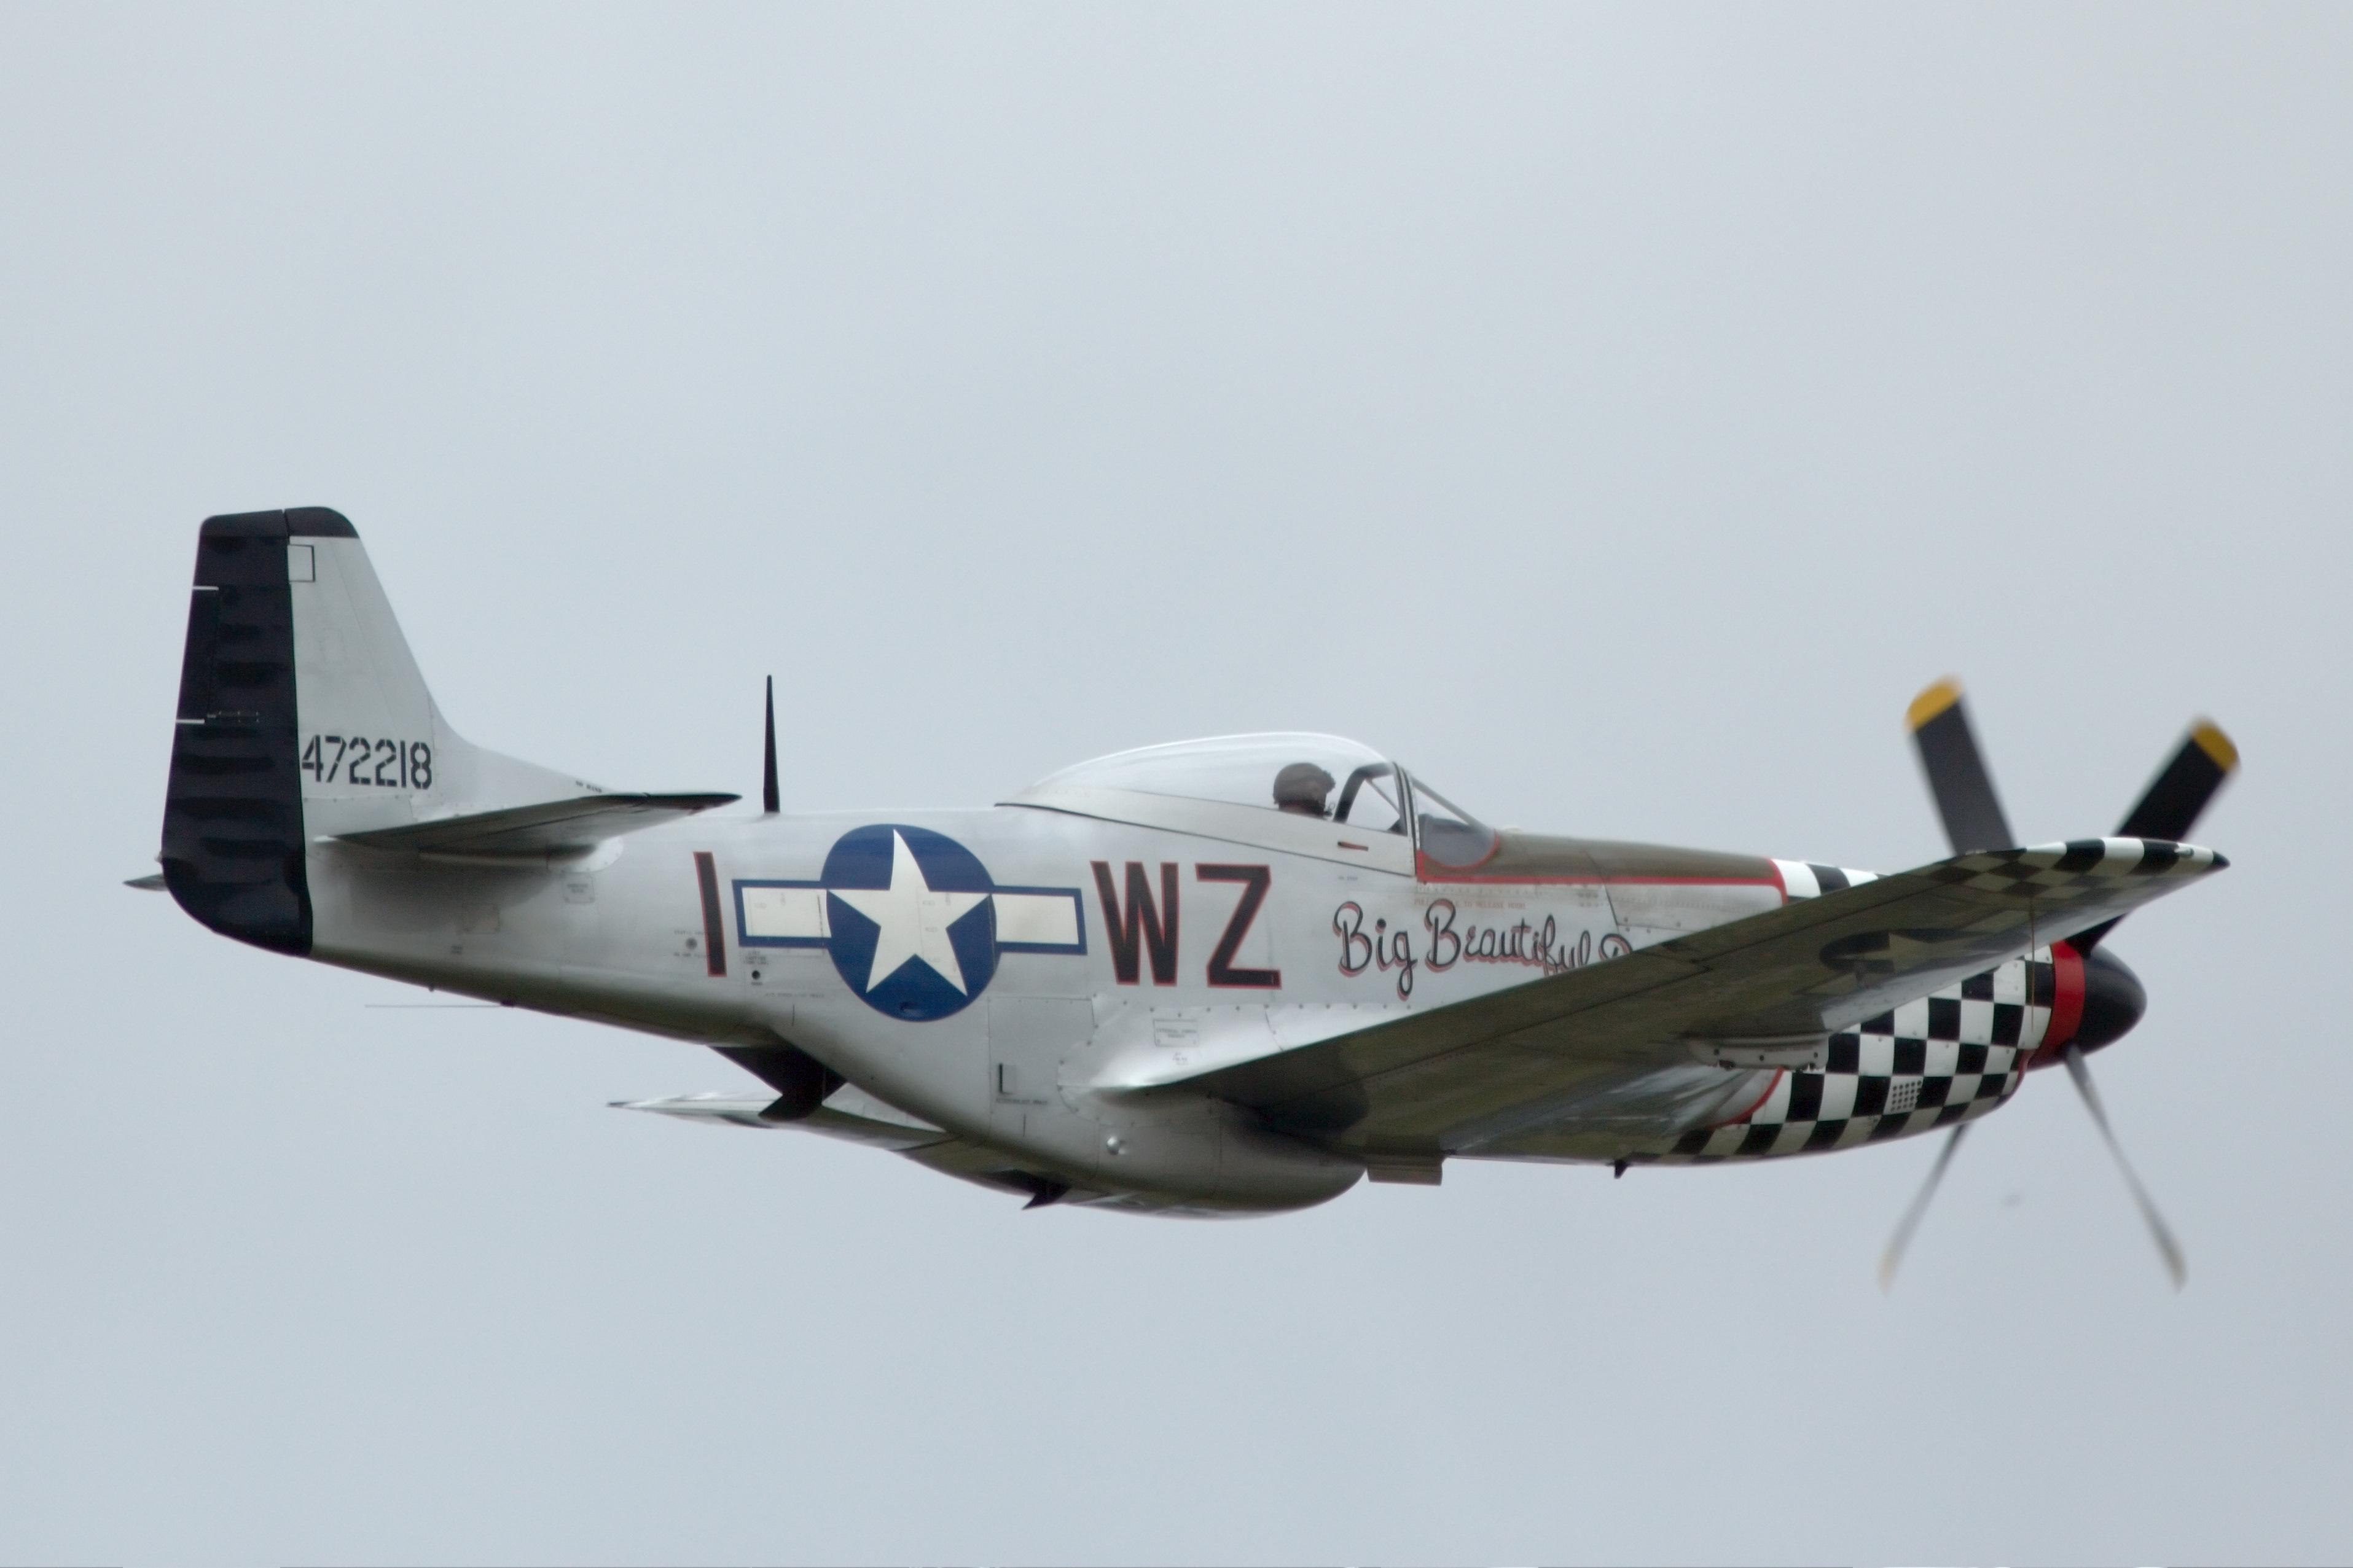 Military North American P 51 Mustang 3830x2553